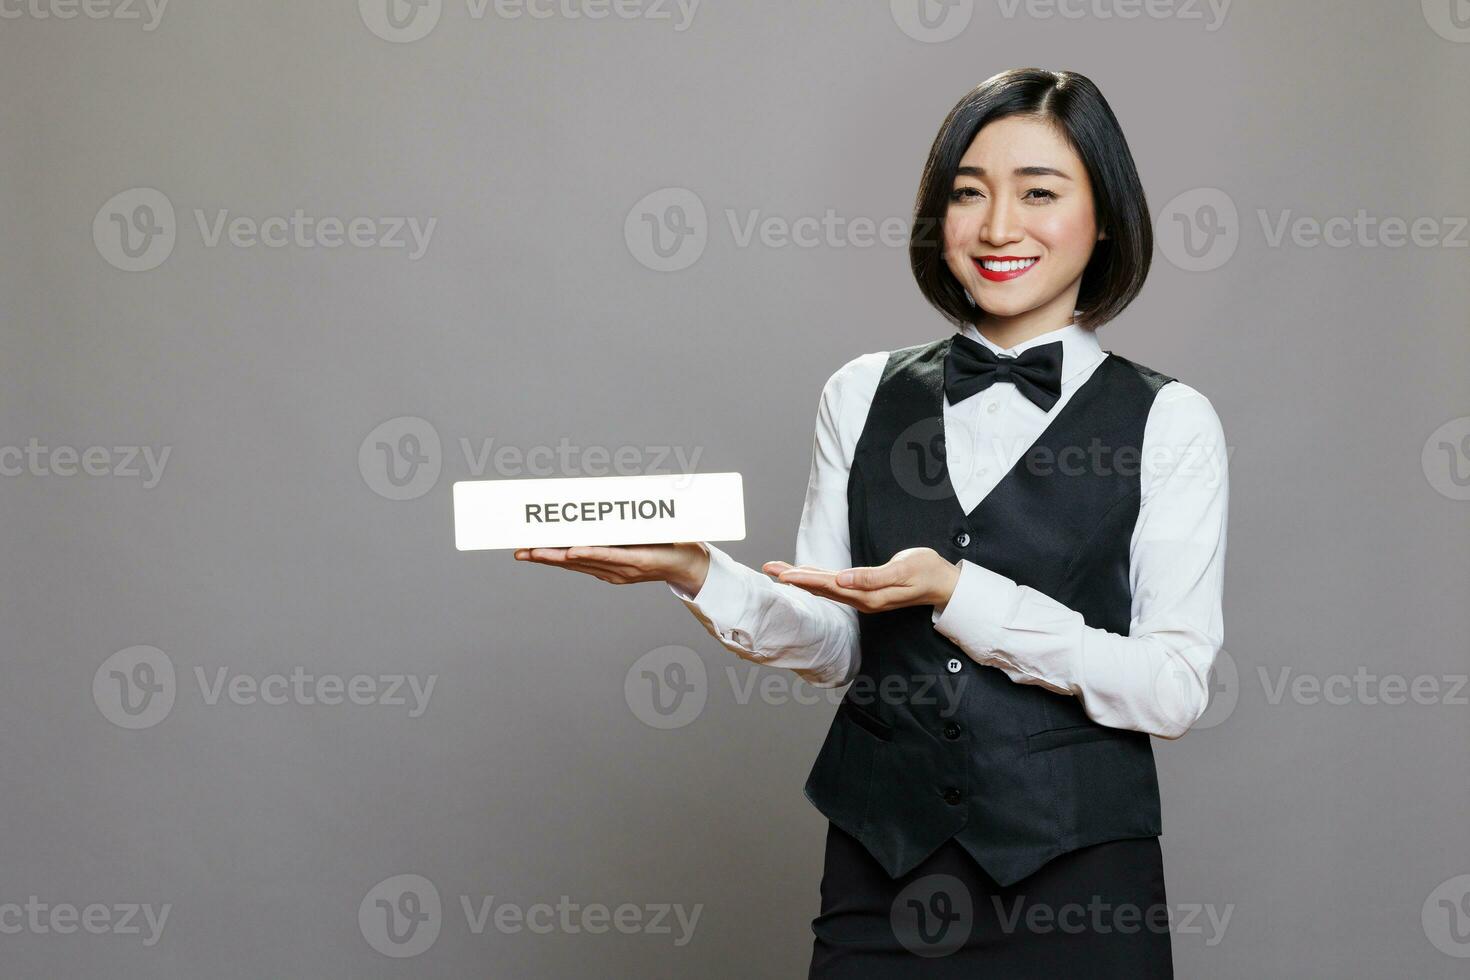 Restaurant receptionist showcasing reception steel plate, smiling and looking at camera with happy expression. Hotel asian woman worker showing tabletop sign studio portrait photo